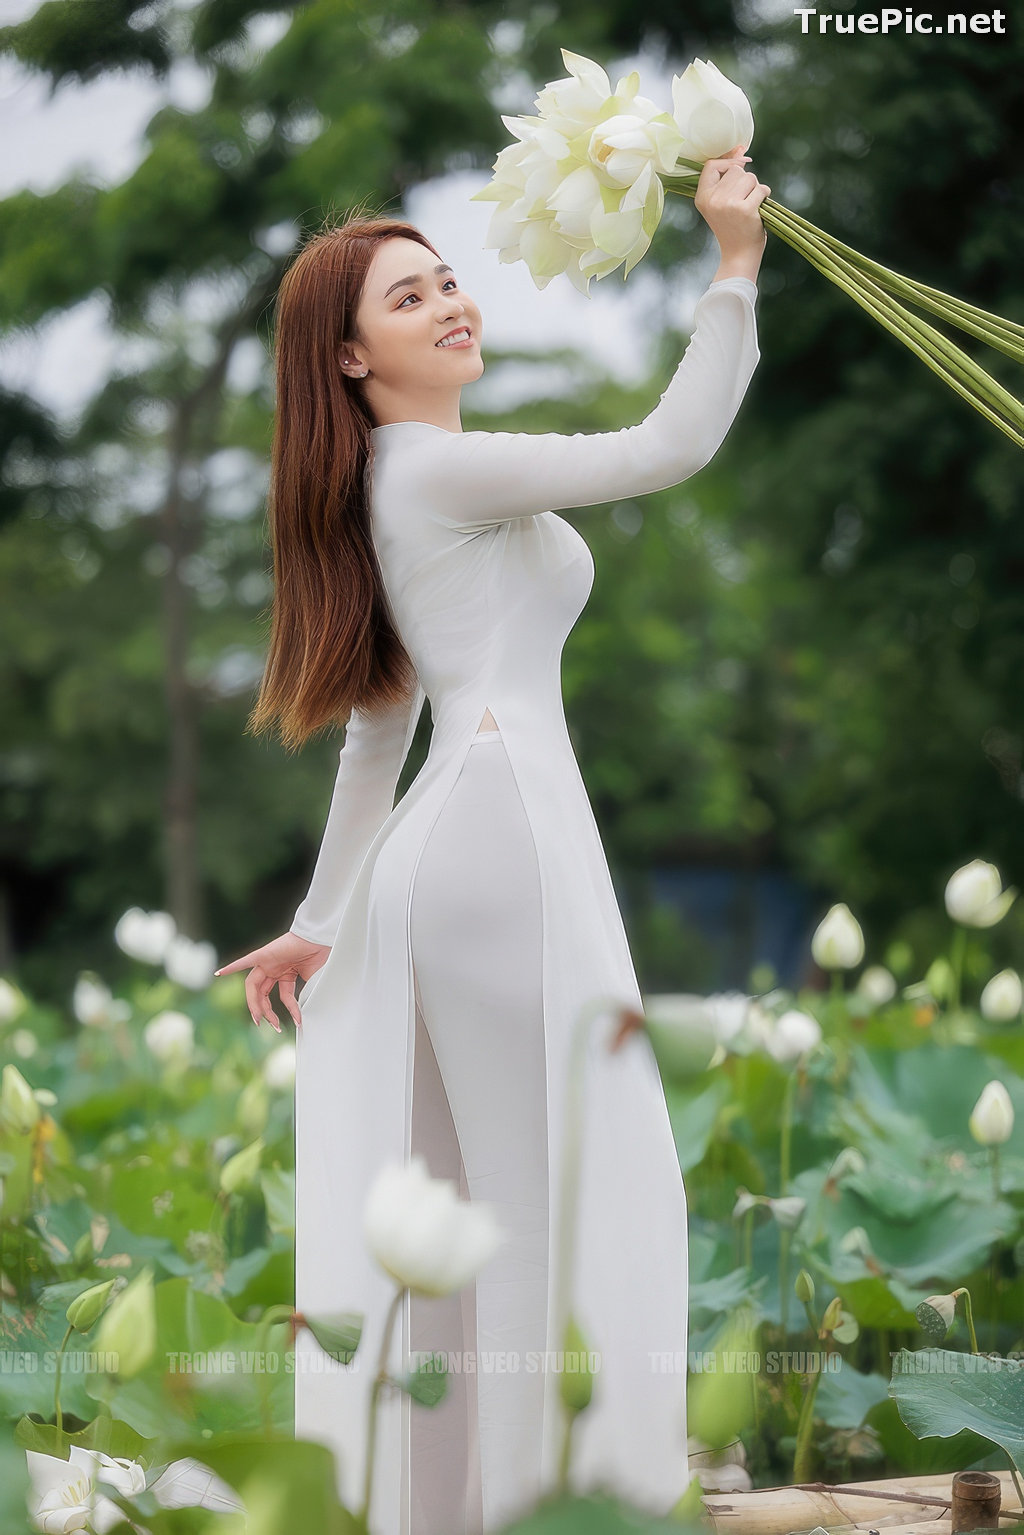 Image Vietnamese Model - Beautiful Girl and Lotus Flower - TruePic.net (56 pictures) - Picture-32